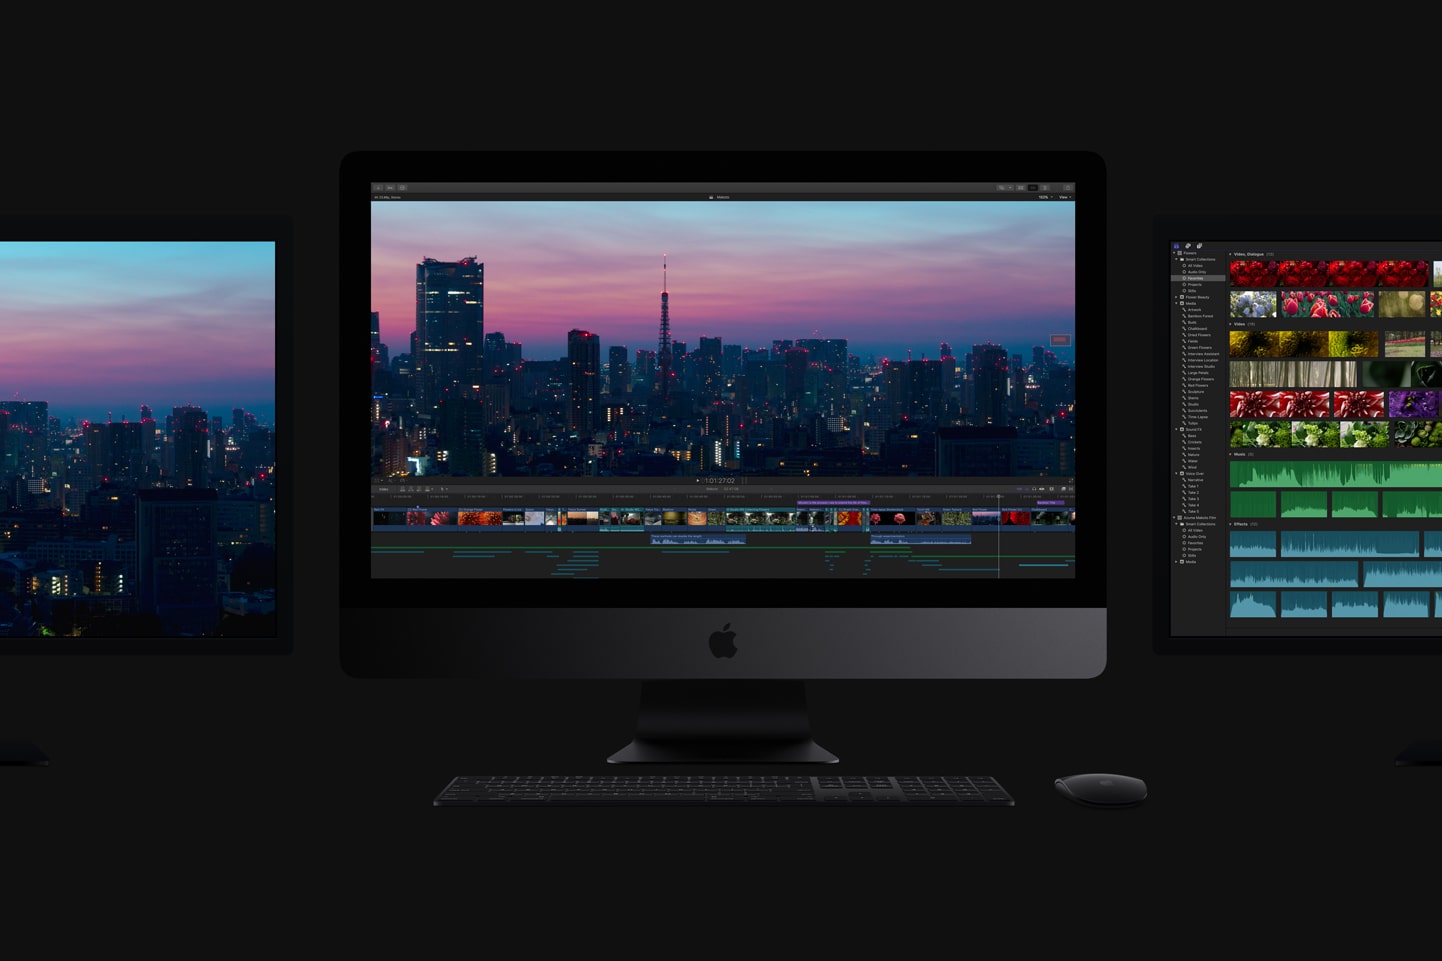 A new iMac Pro could still launch. Here's what I want to see